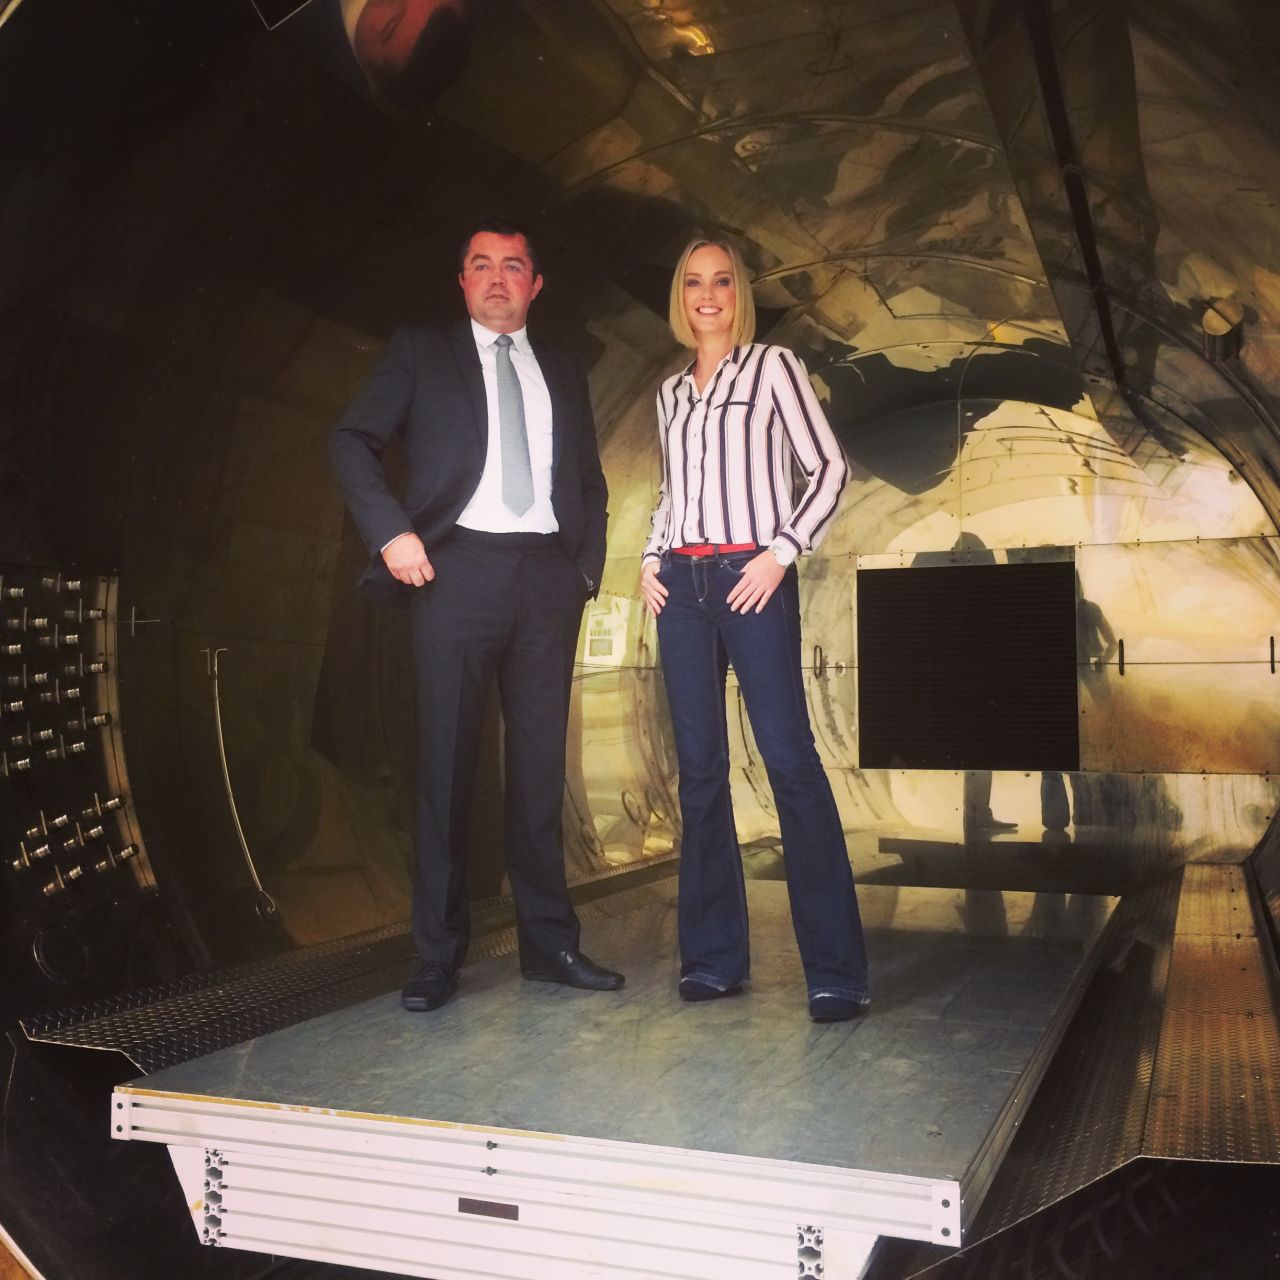 The carbon fiber car parts are cooked inside an autoclave. This giant oven is used to bake the car chassis and temperatures reach up to 300 degrees Celsius or 572 Fahrenheit. Luckily it wasn't turned on when Eric and Amanda stepped inside.